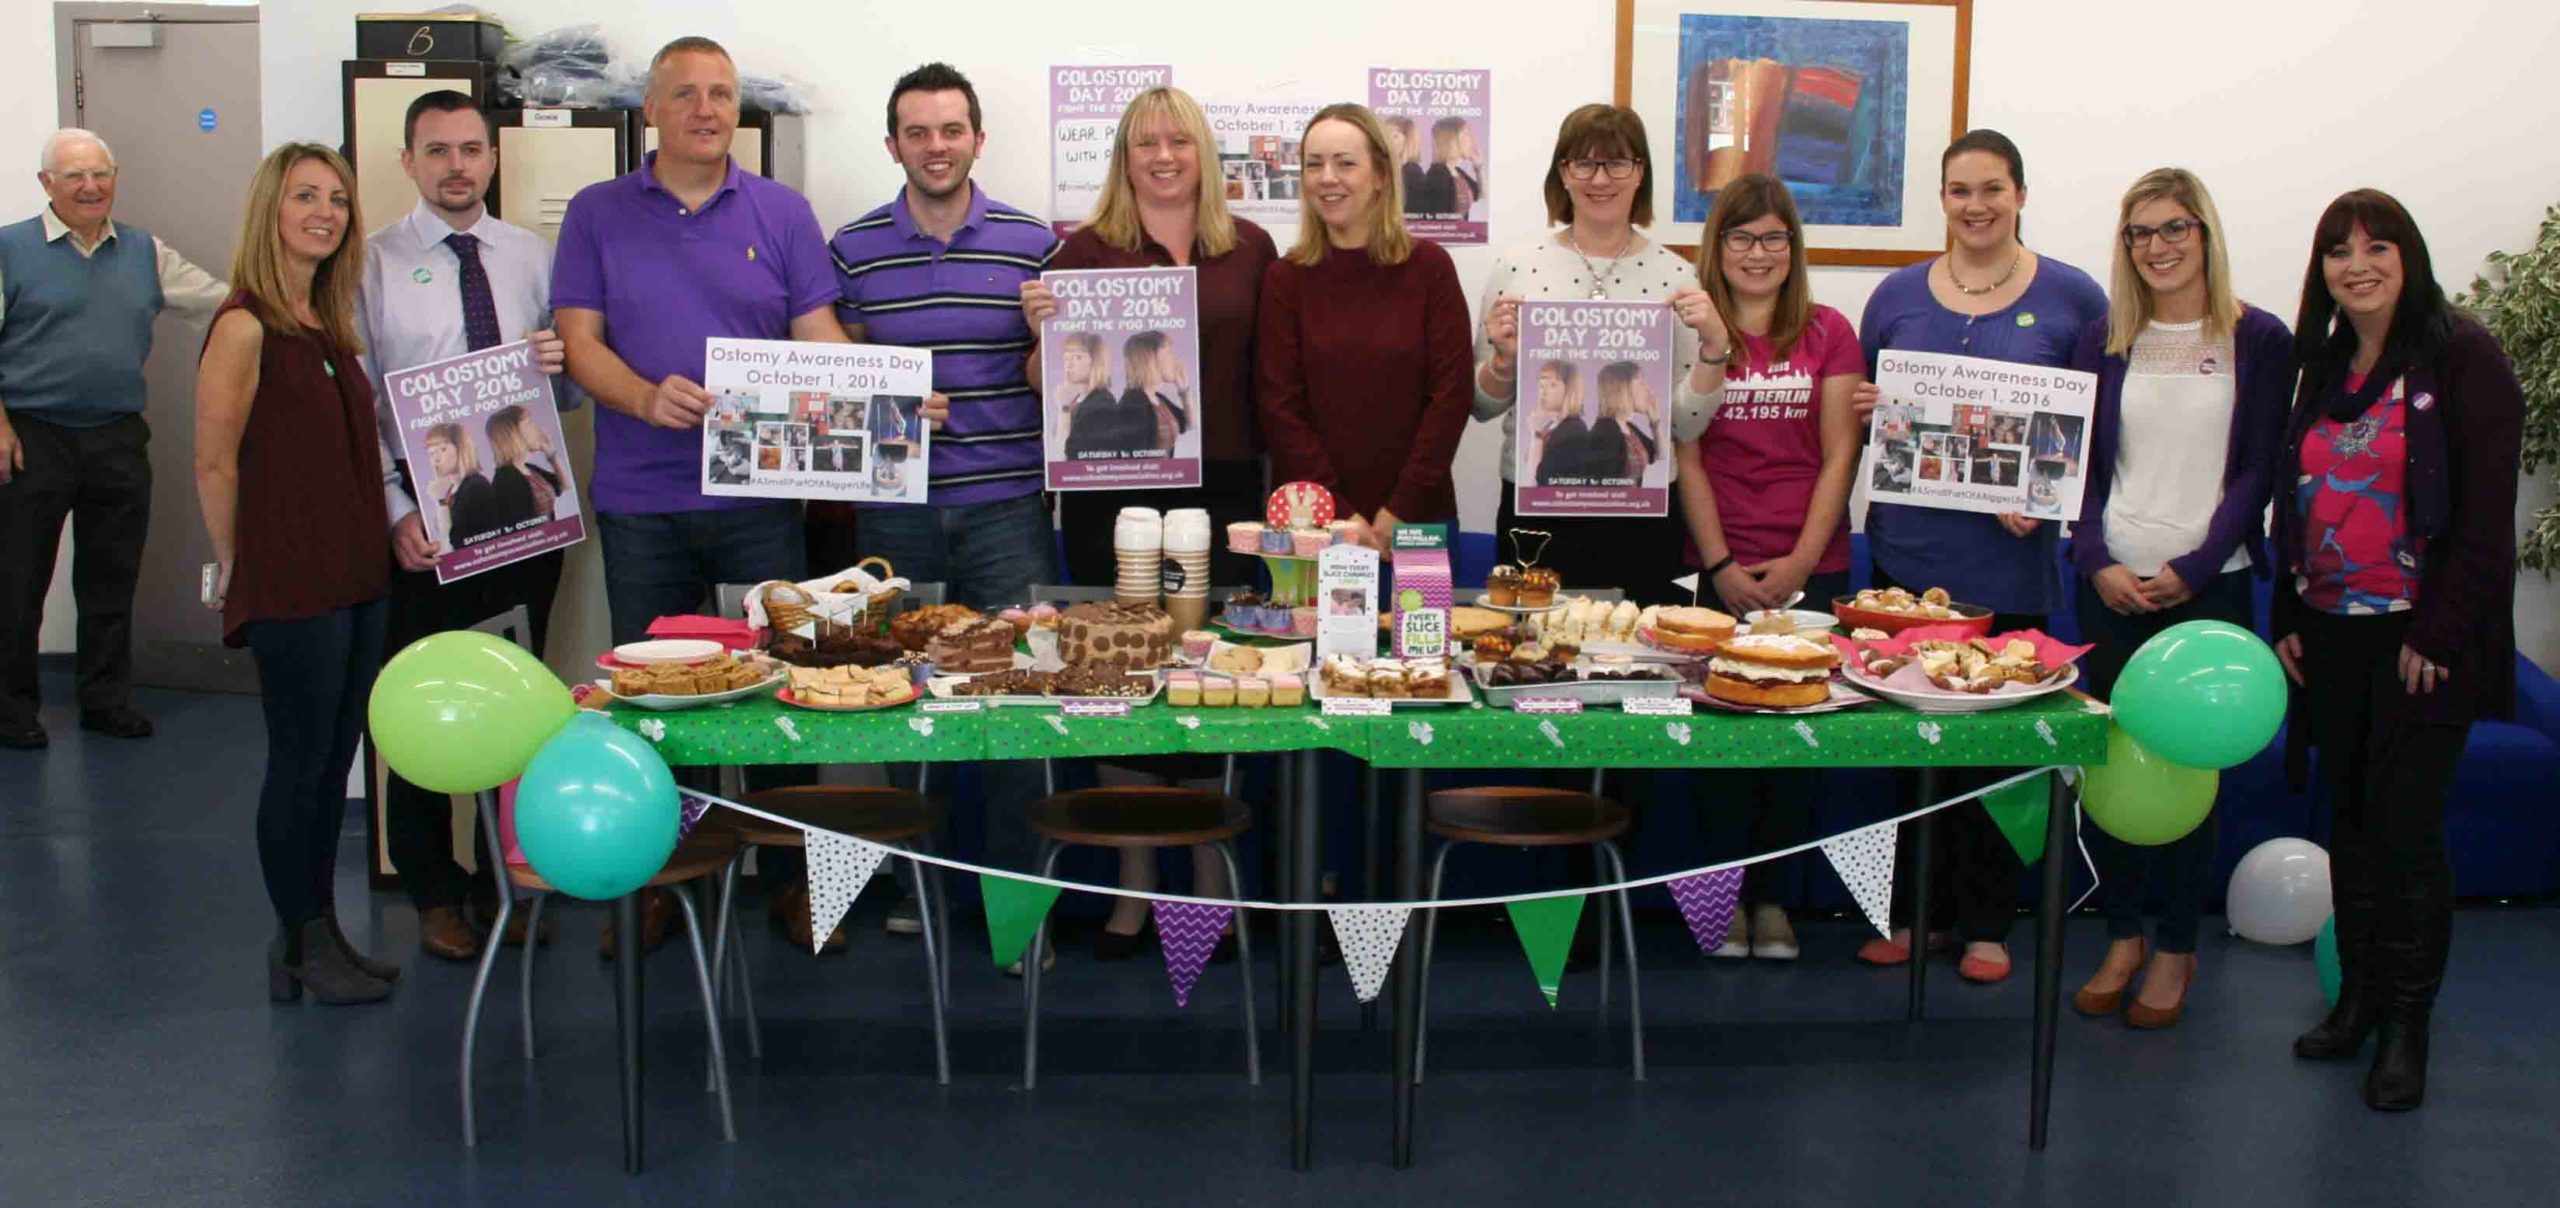 charity bake sale for colostomy day at eakin, 2016